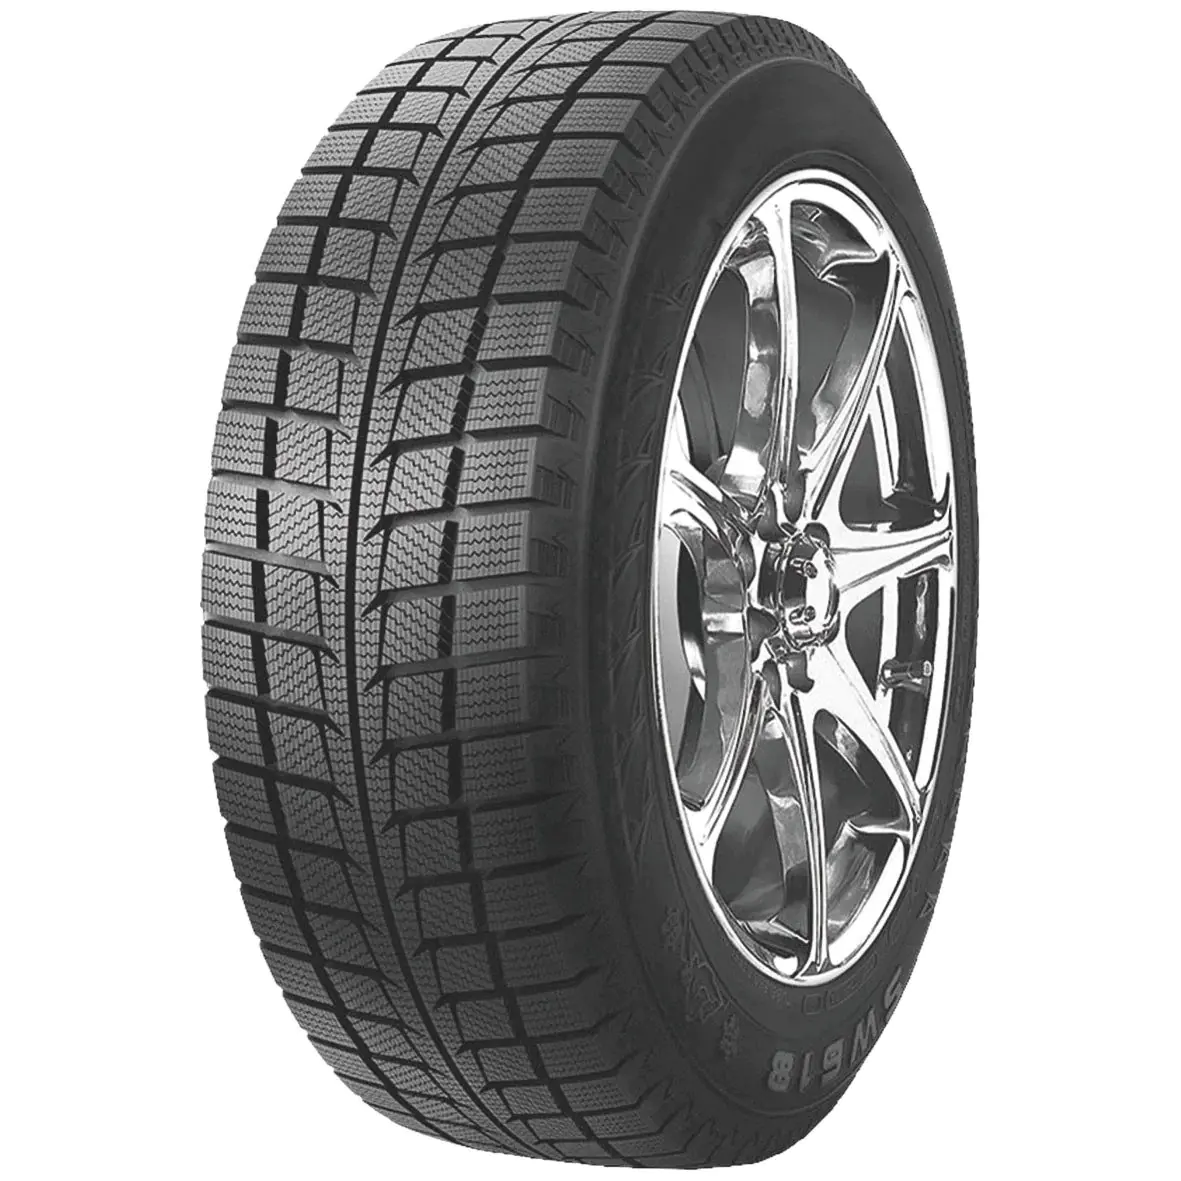 Gomme 4x4 Suv Trazano 275/45 R20 110H SW618 XL M+S Invernale